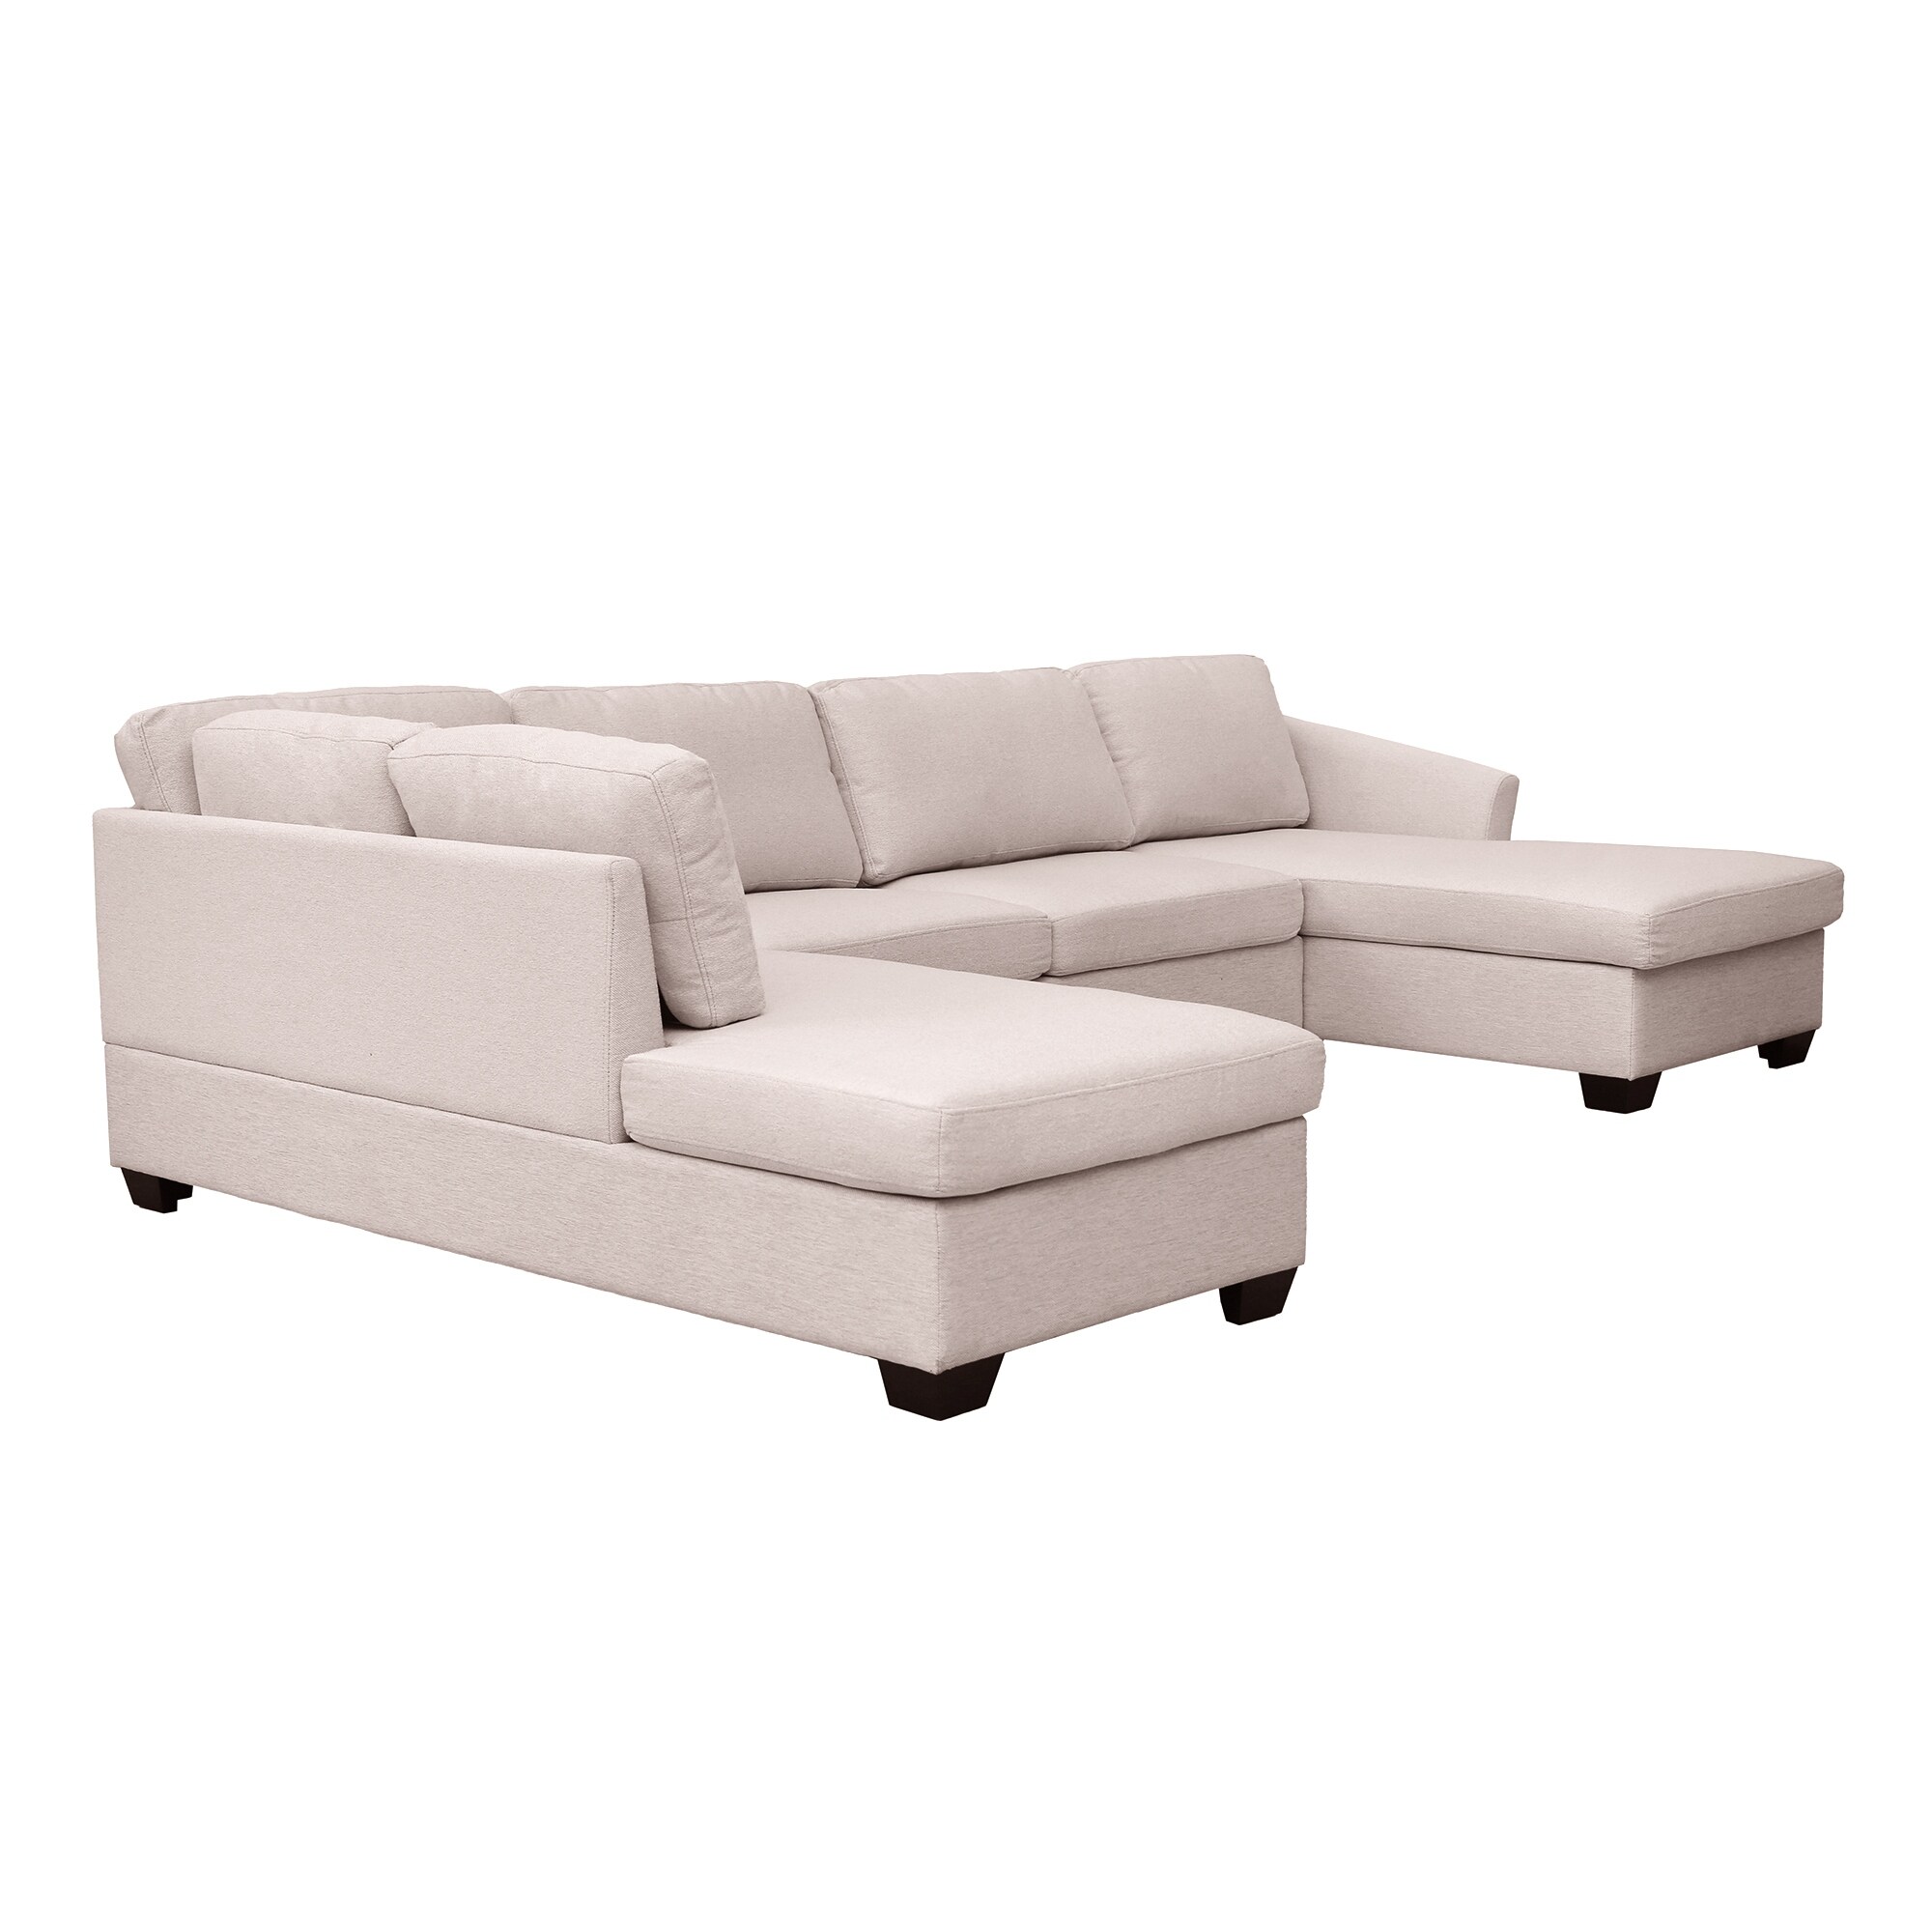 Beige Breathable Fabric U-Shape Sectional Sofa with Double Chaise Lounge, Thick Foam Padding, Removable Seat Cushions